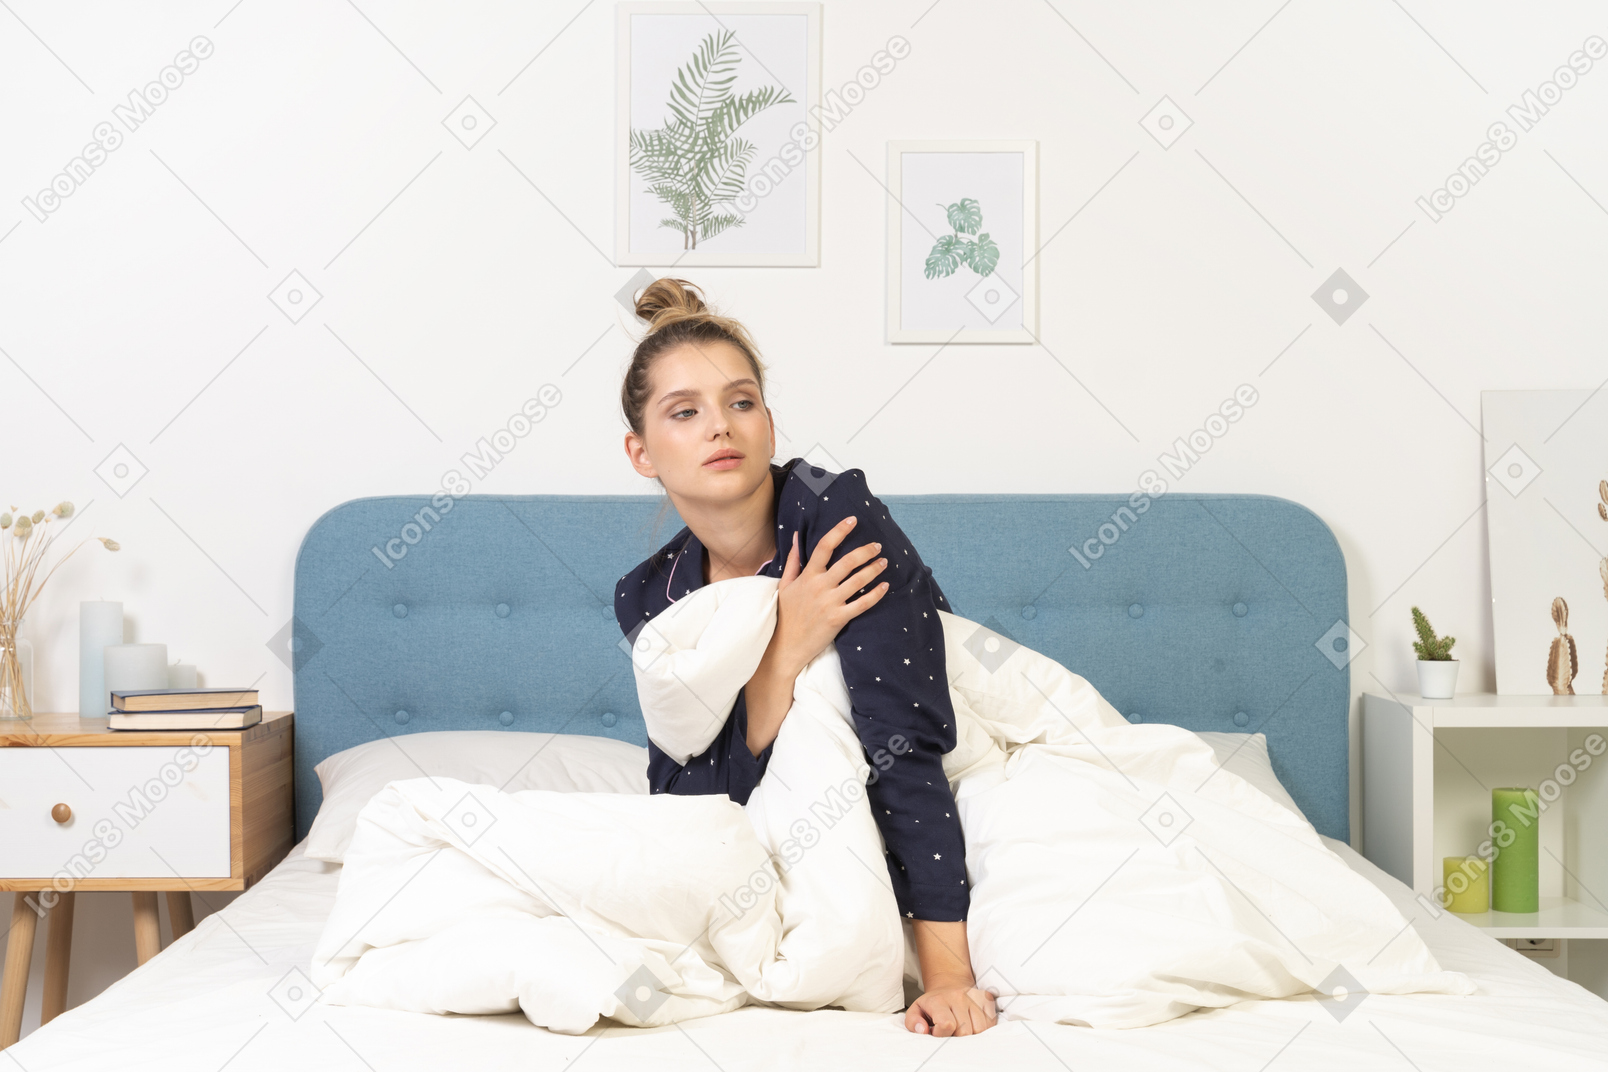 Front view of a tired young woman in pajamas touching her arm while staying in bed